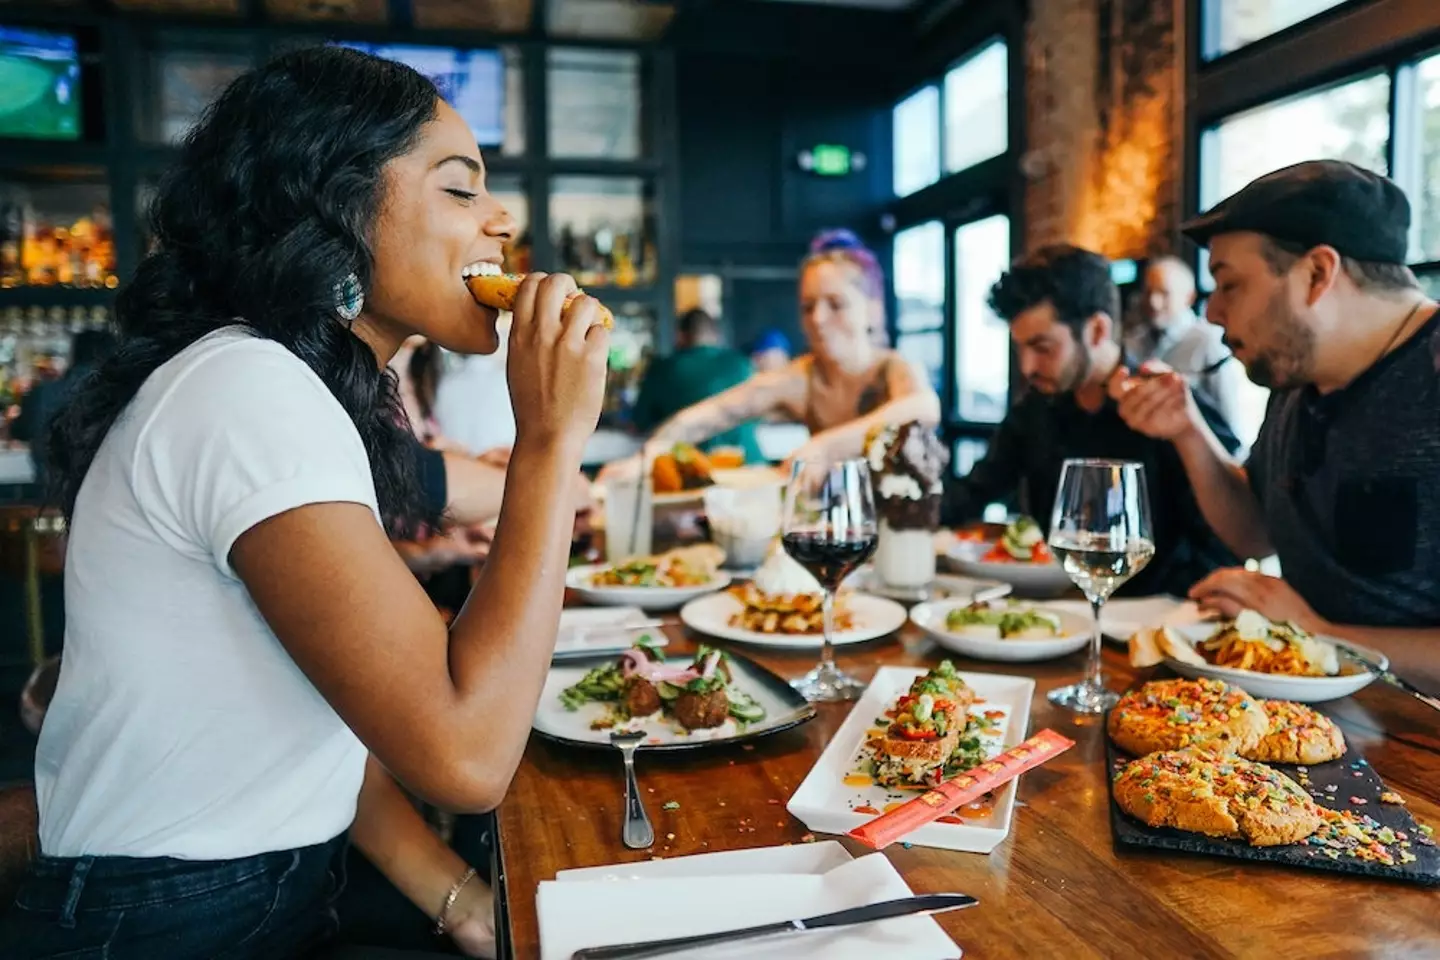 Dining out can be tough for people with misophonia.